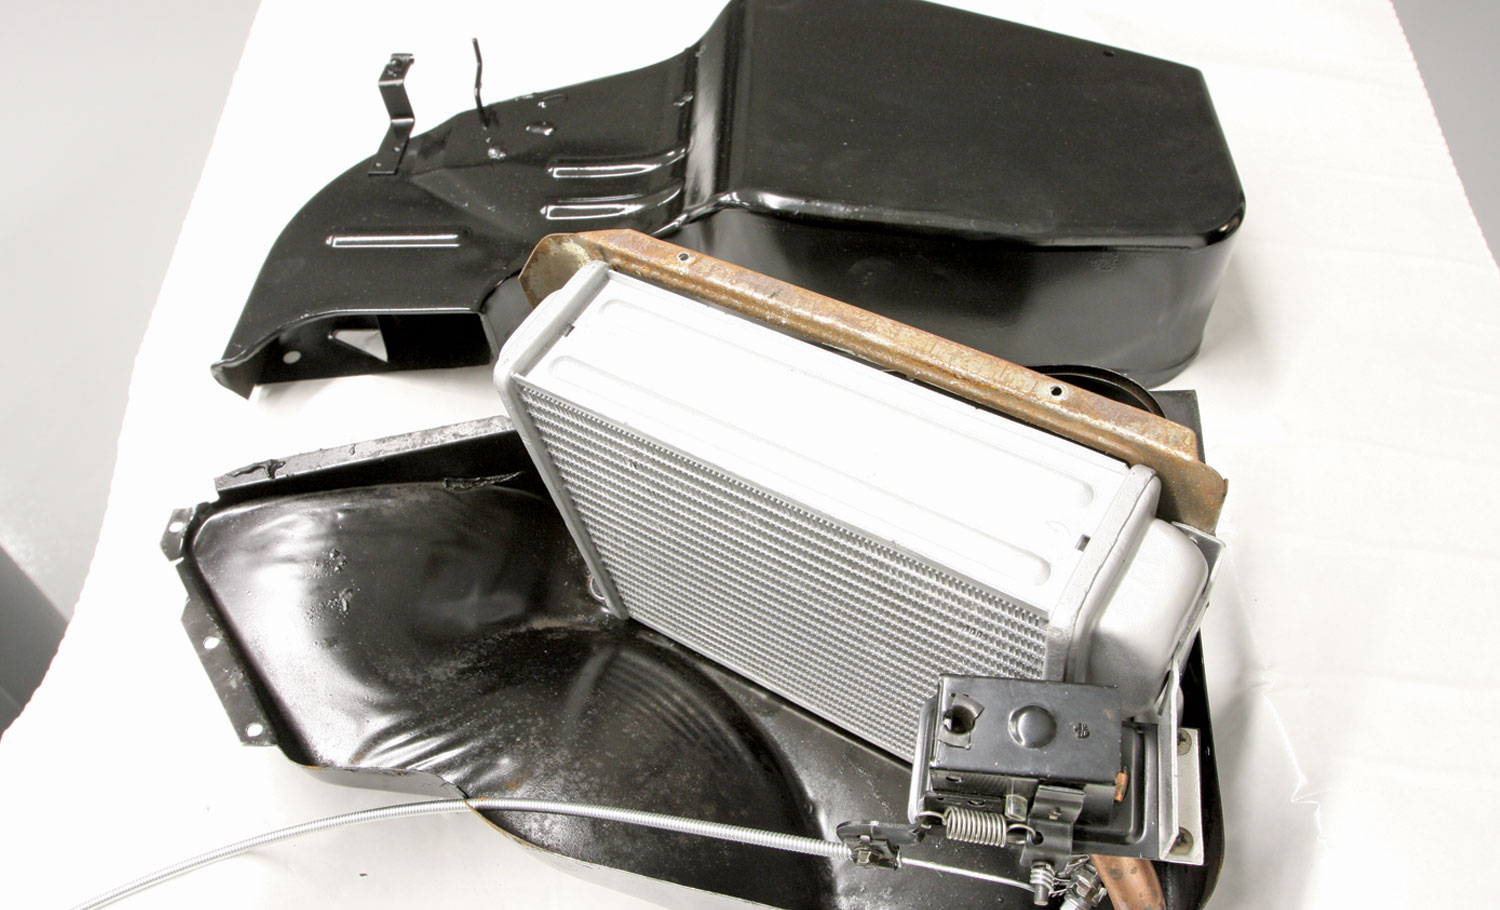 the heater core assembly is attached to the inner housing of the heater box and the water control cable is connected to the Deluxe Heater Control Valve